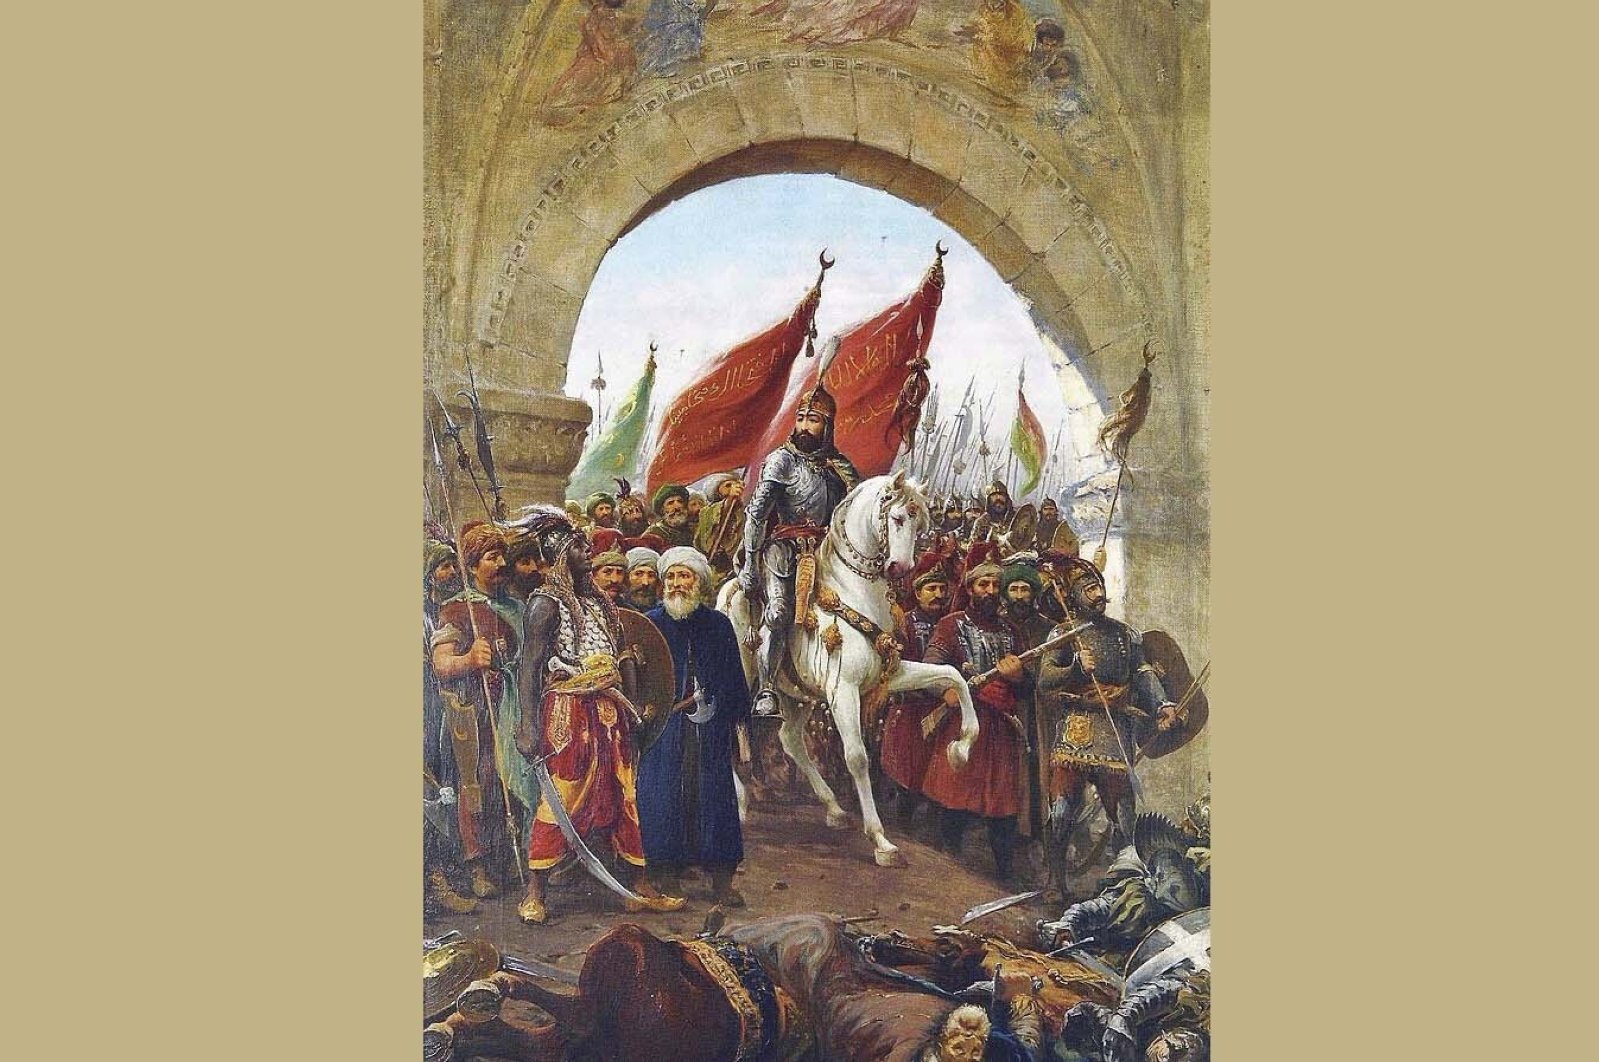 Conquest of Istanbul: How is it depicted in visual and written media?